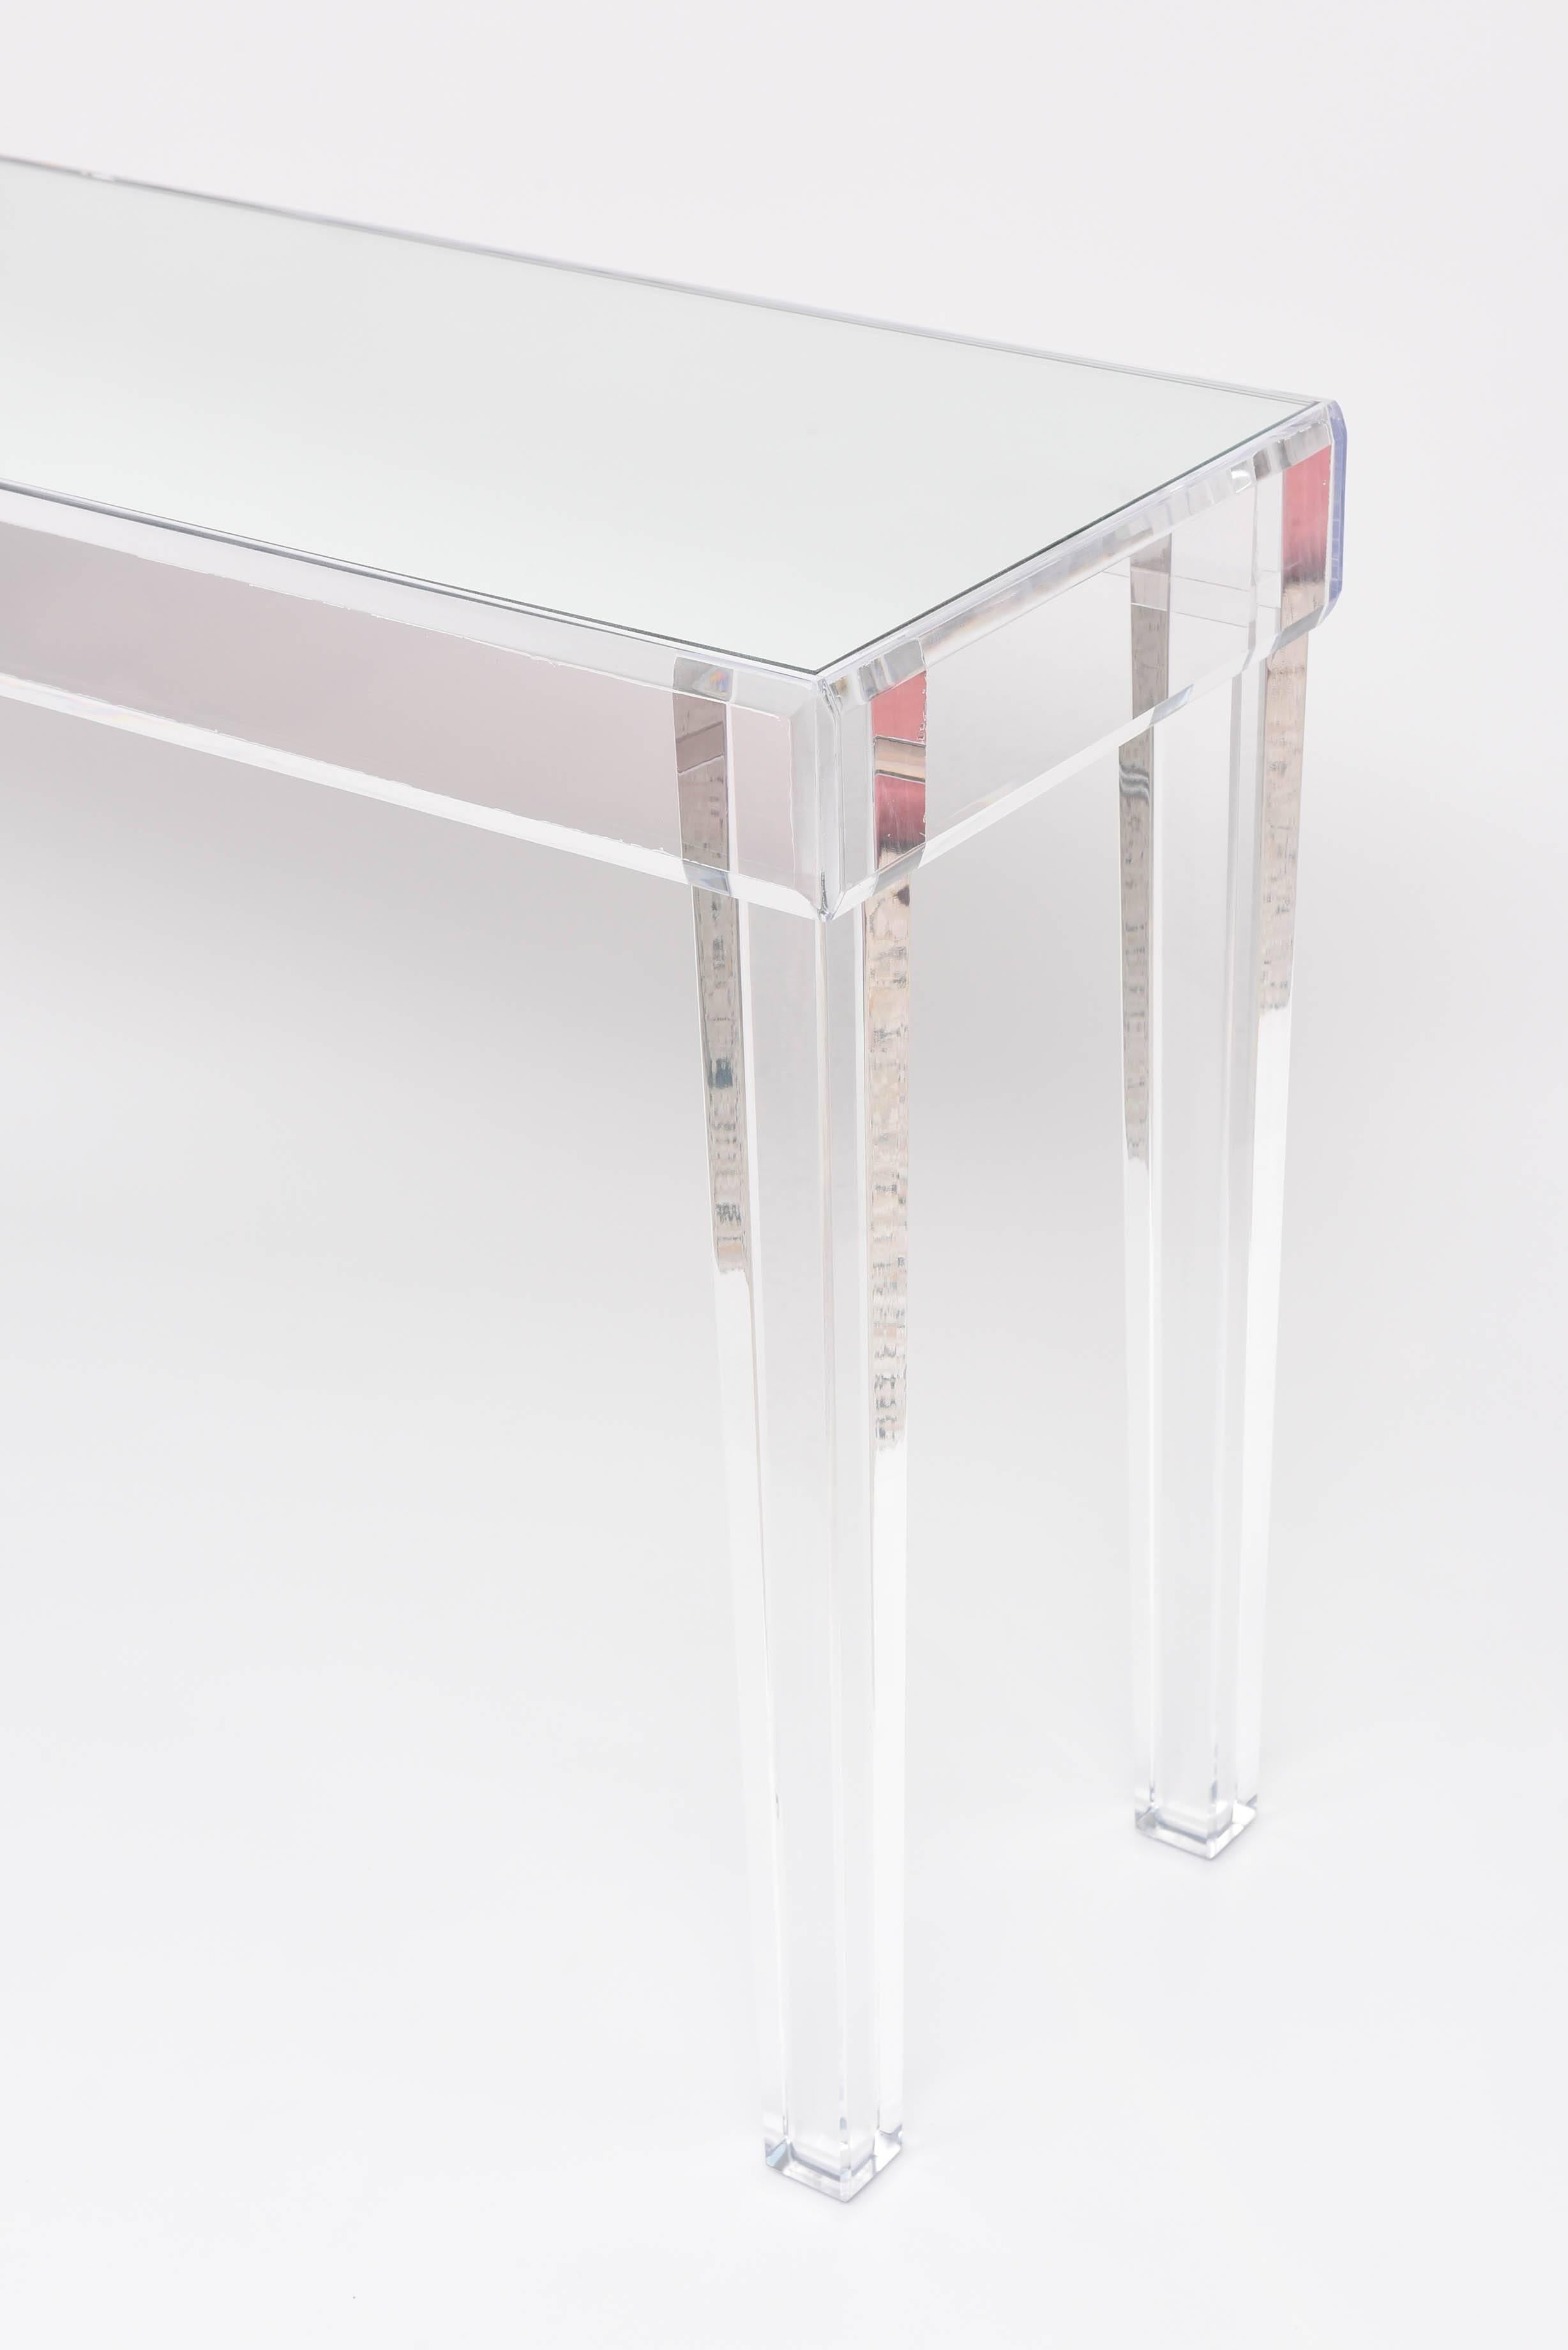 This beautiful lucite console is quite stylish with its Louis XVI style tapered legs and inset mirror top.  The piece is quite lite in appearance and make for the perfect entry hall piece, dining room buffet or bar.

Please feel free to contact us